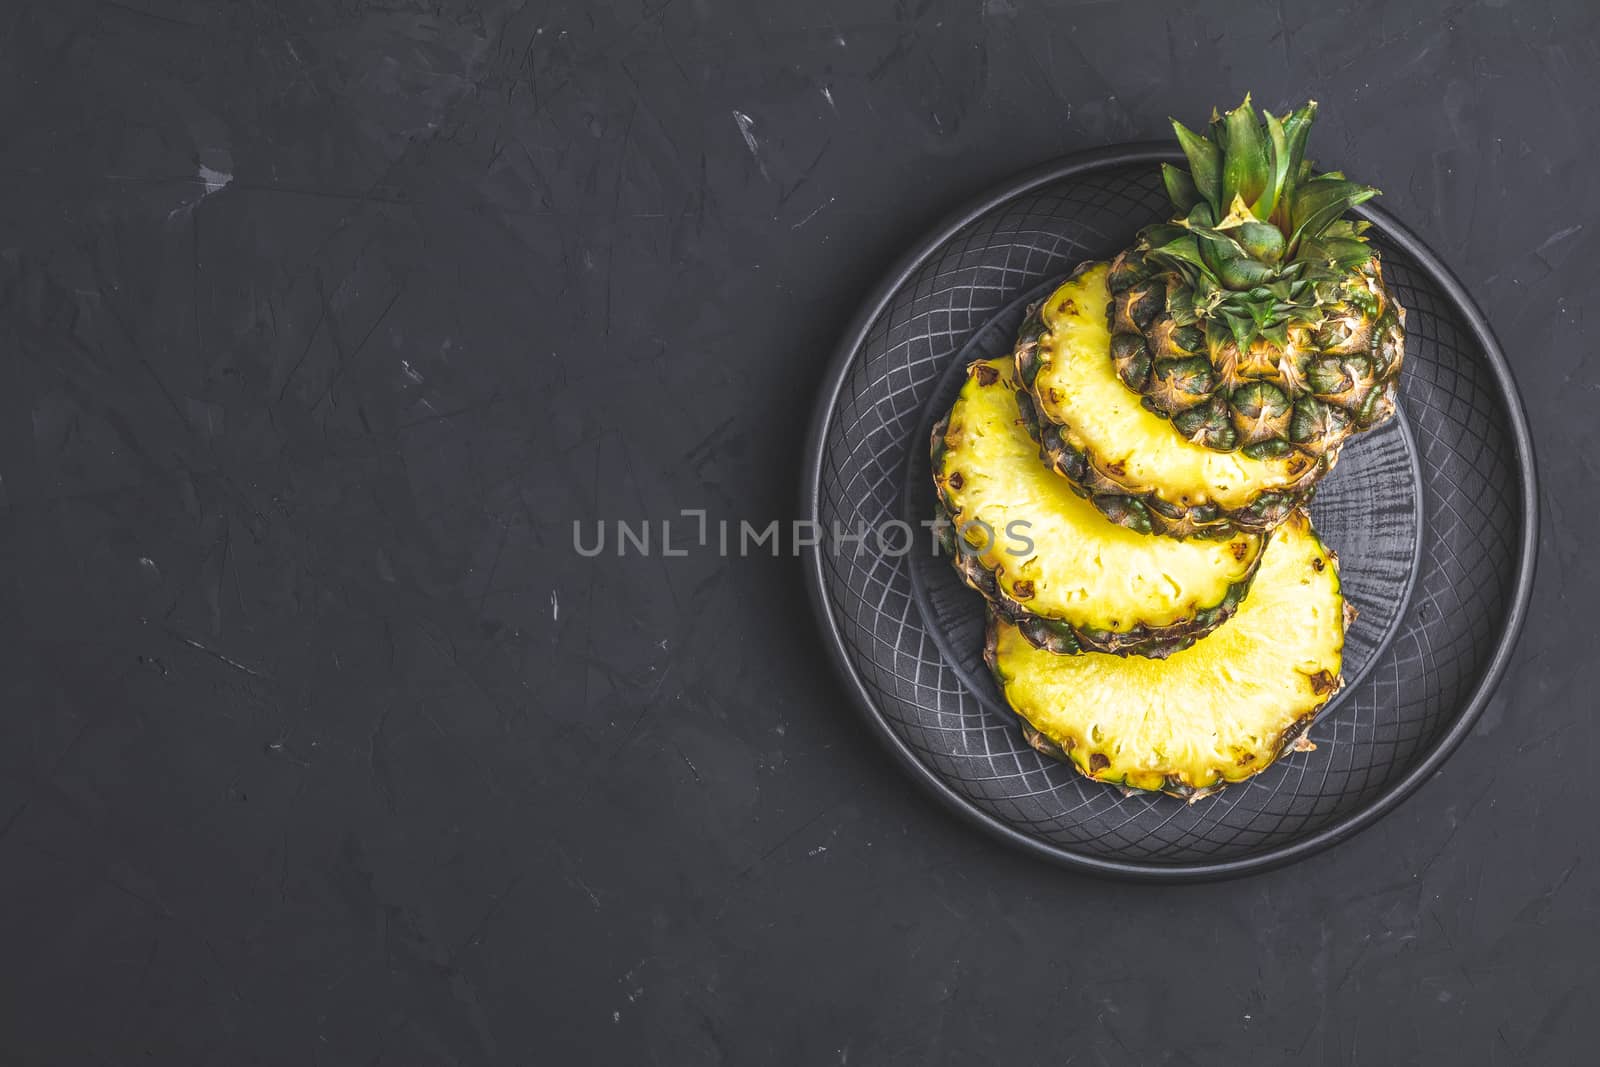 Sliced pineapple in ceramic plate on black stone concrete textured surface background. Top view with copy space for your text.